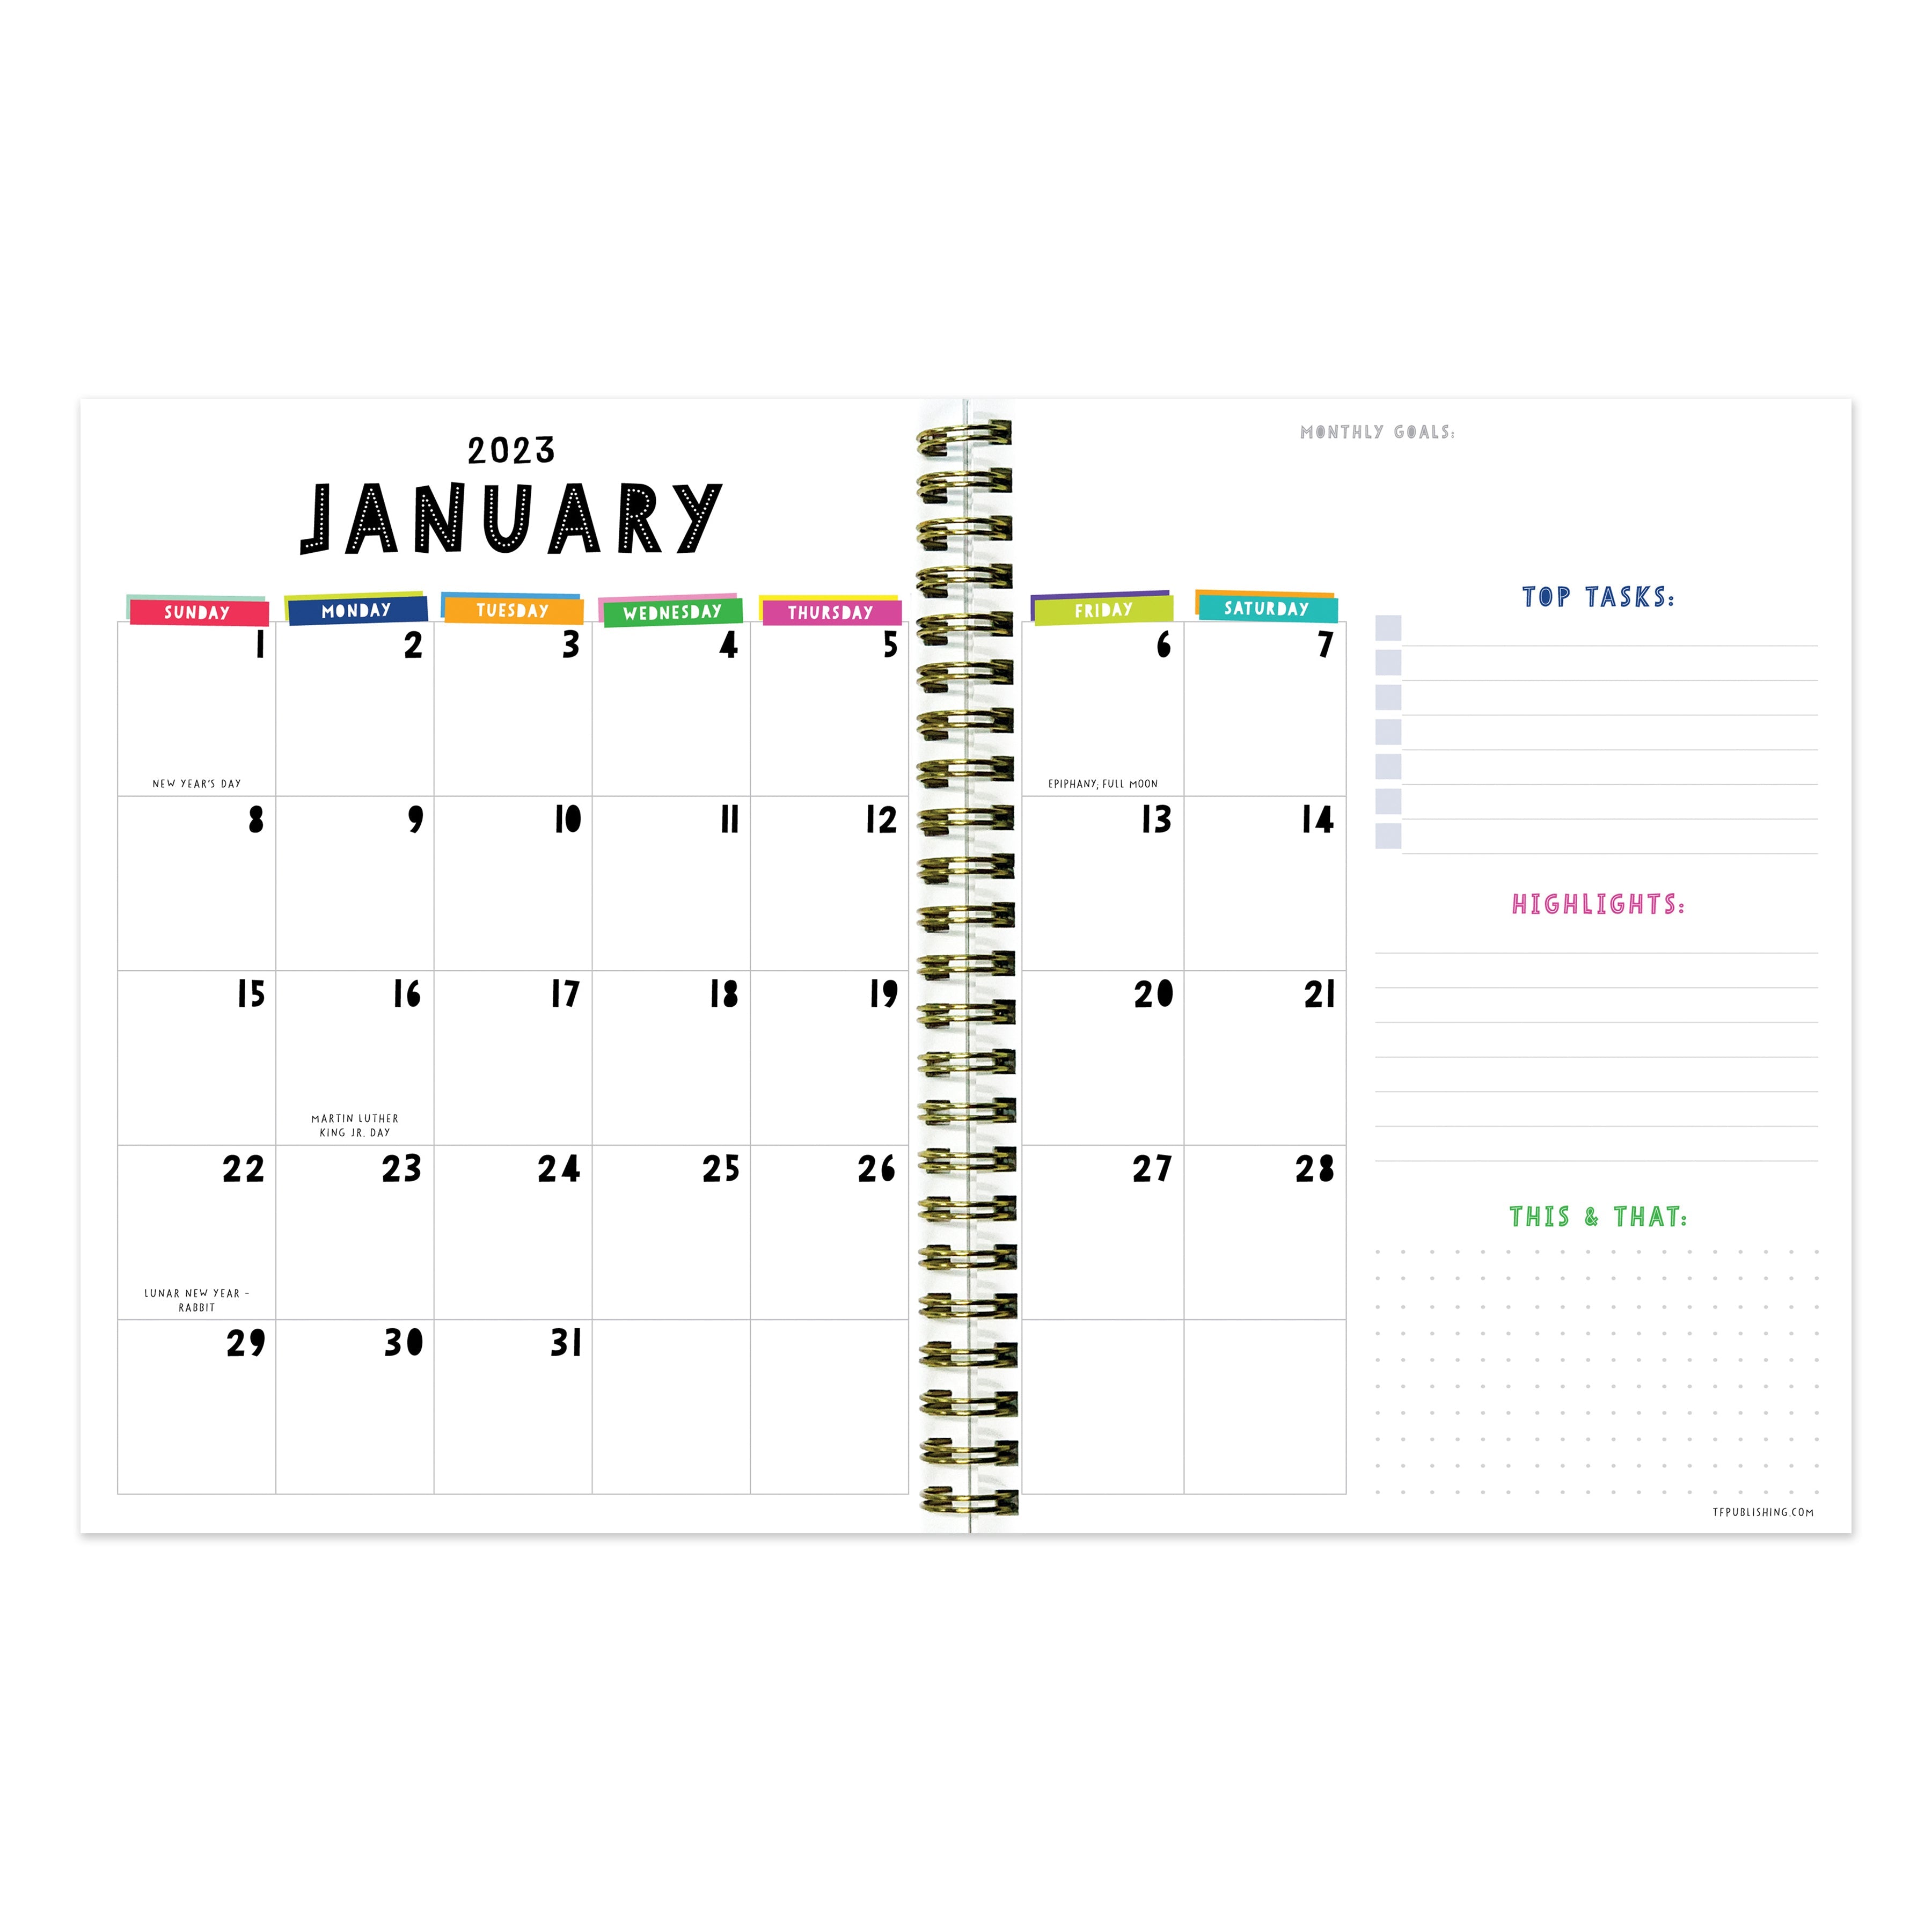 2023 Roll With It - Medium Weekly, Monthly Diary/Planner